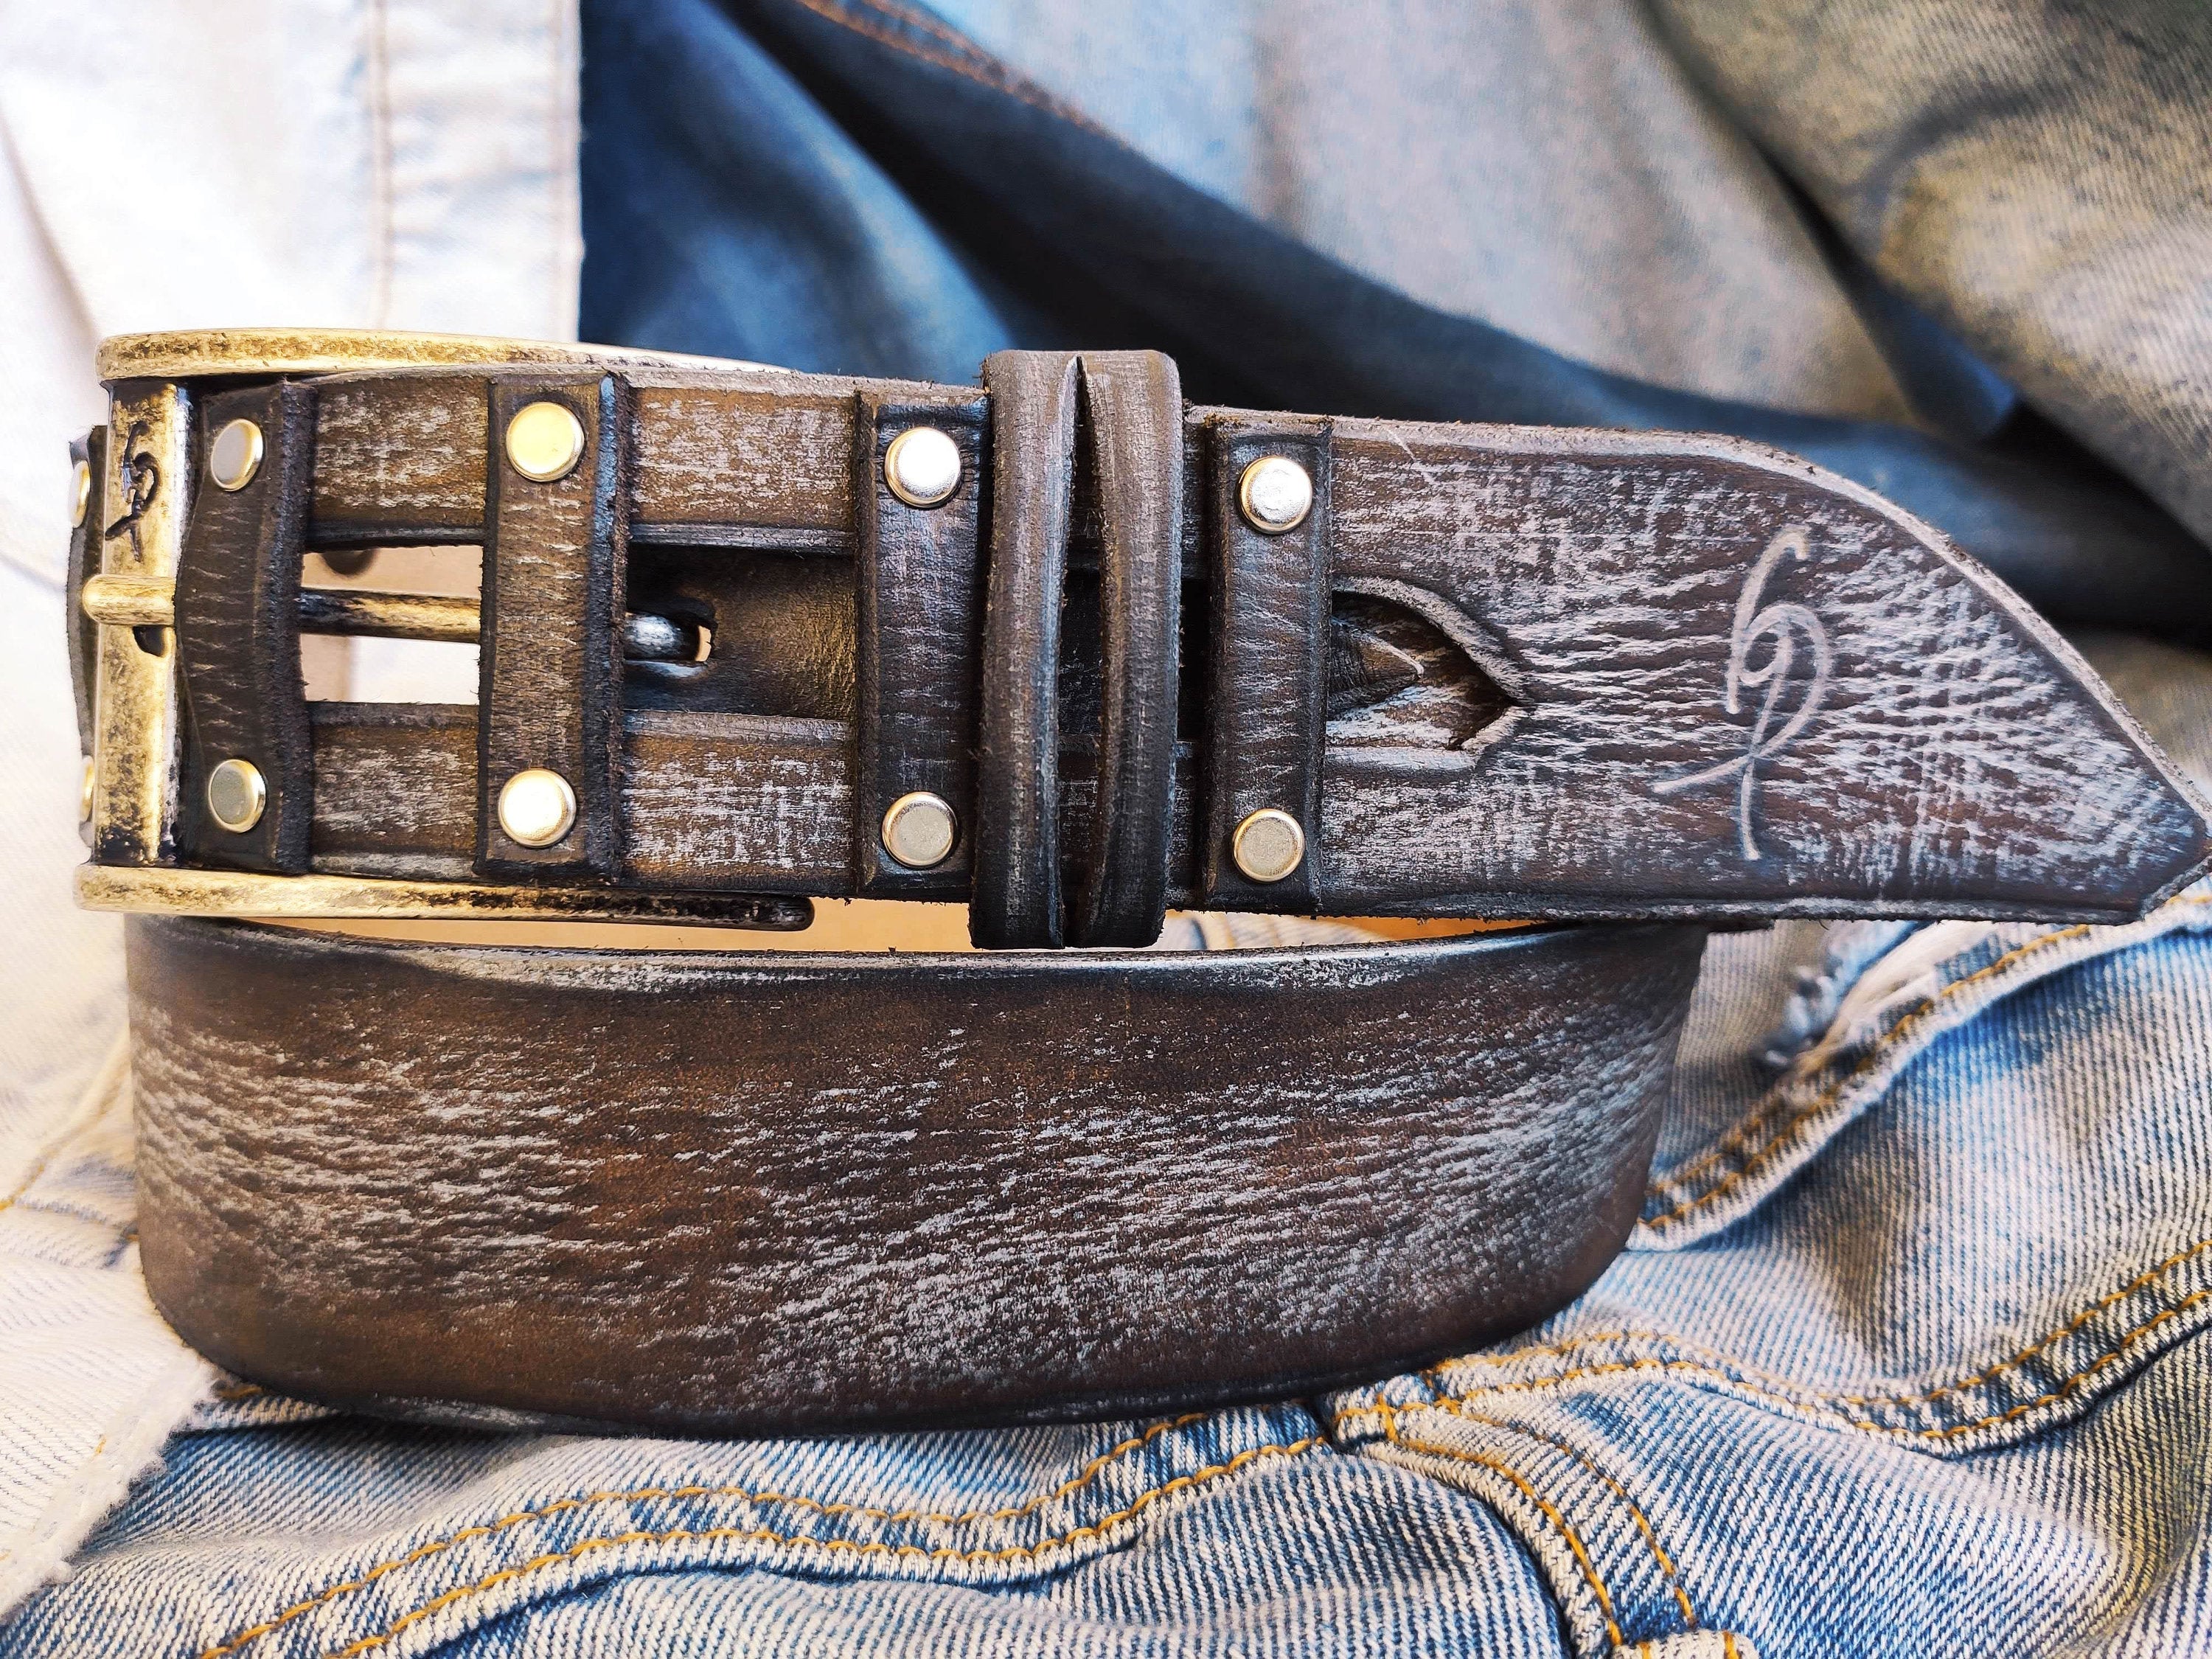 LEATHER BELT WITH SQUARE BUCKLE - Brown